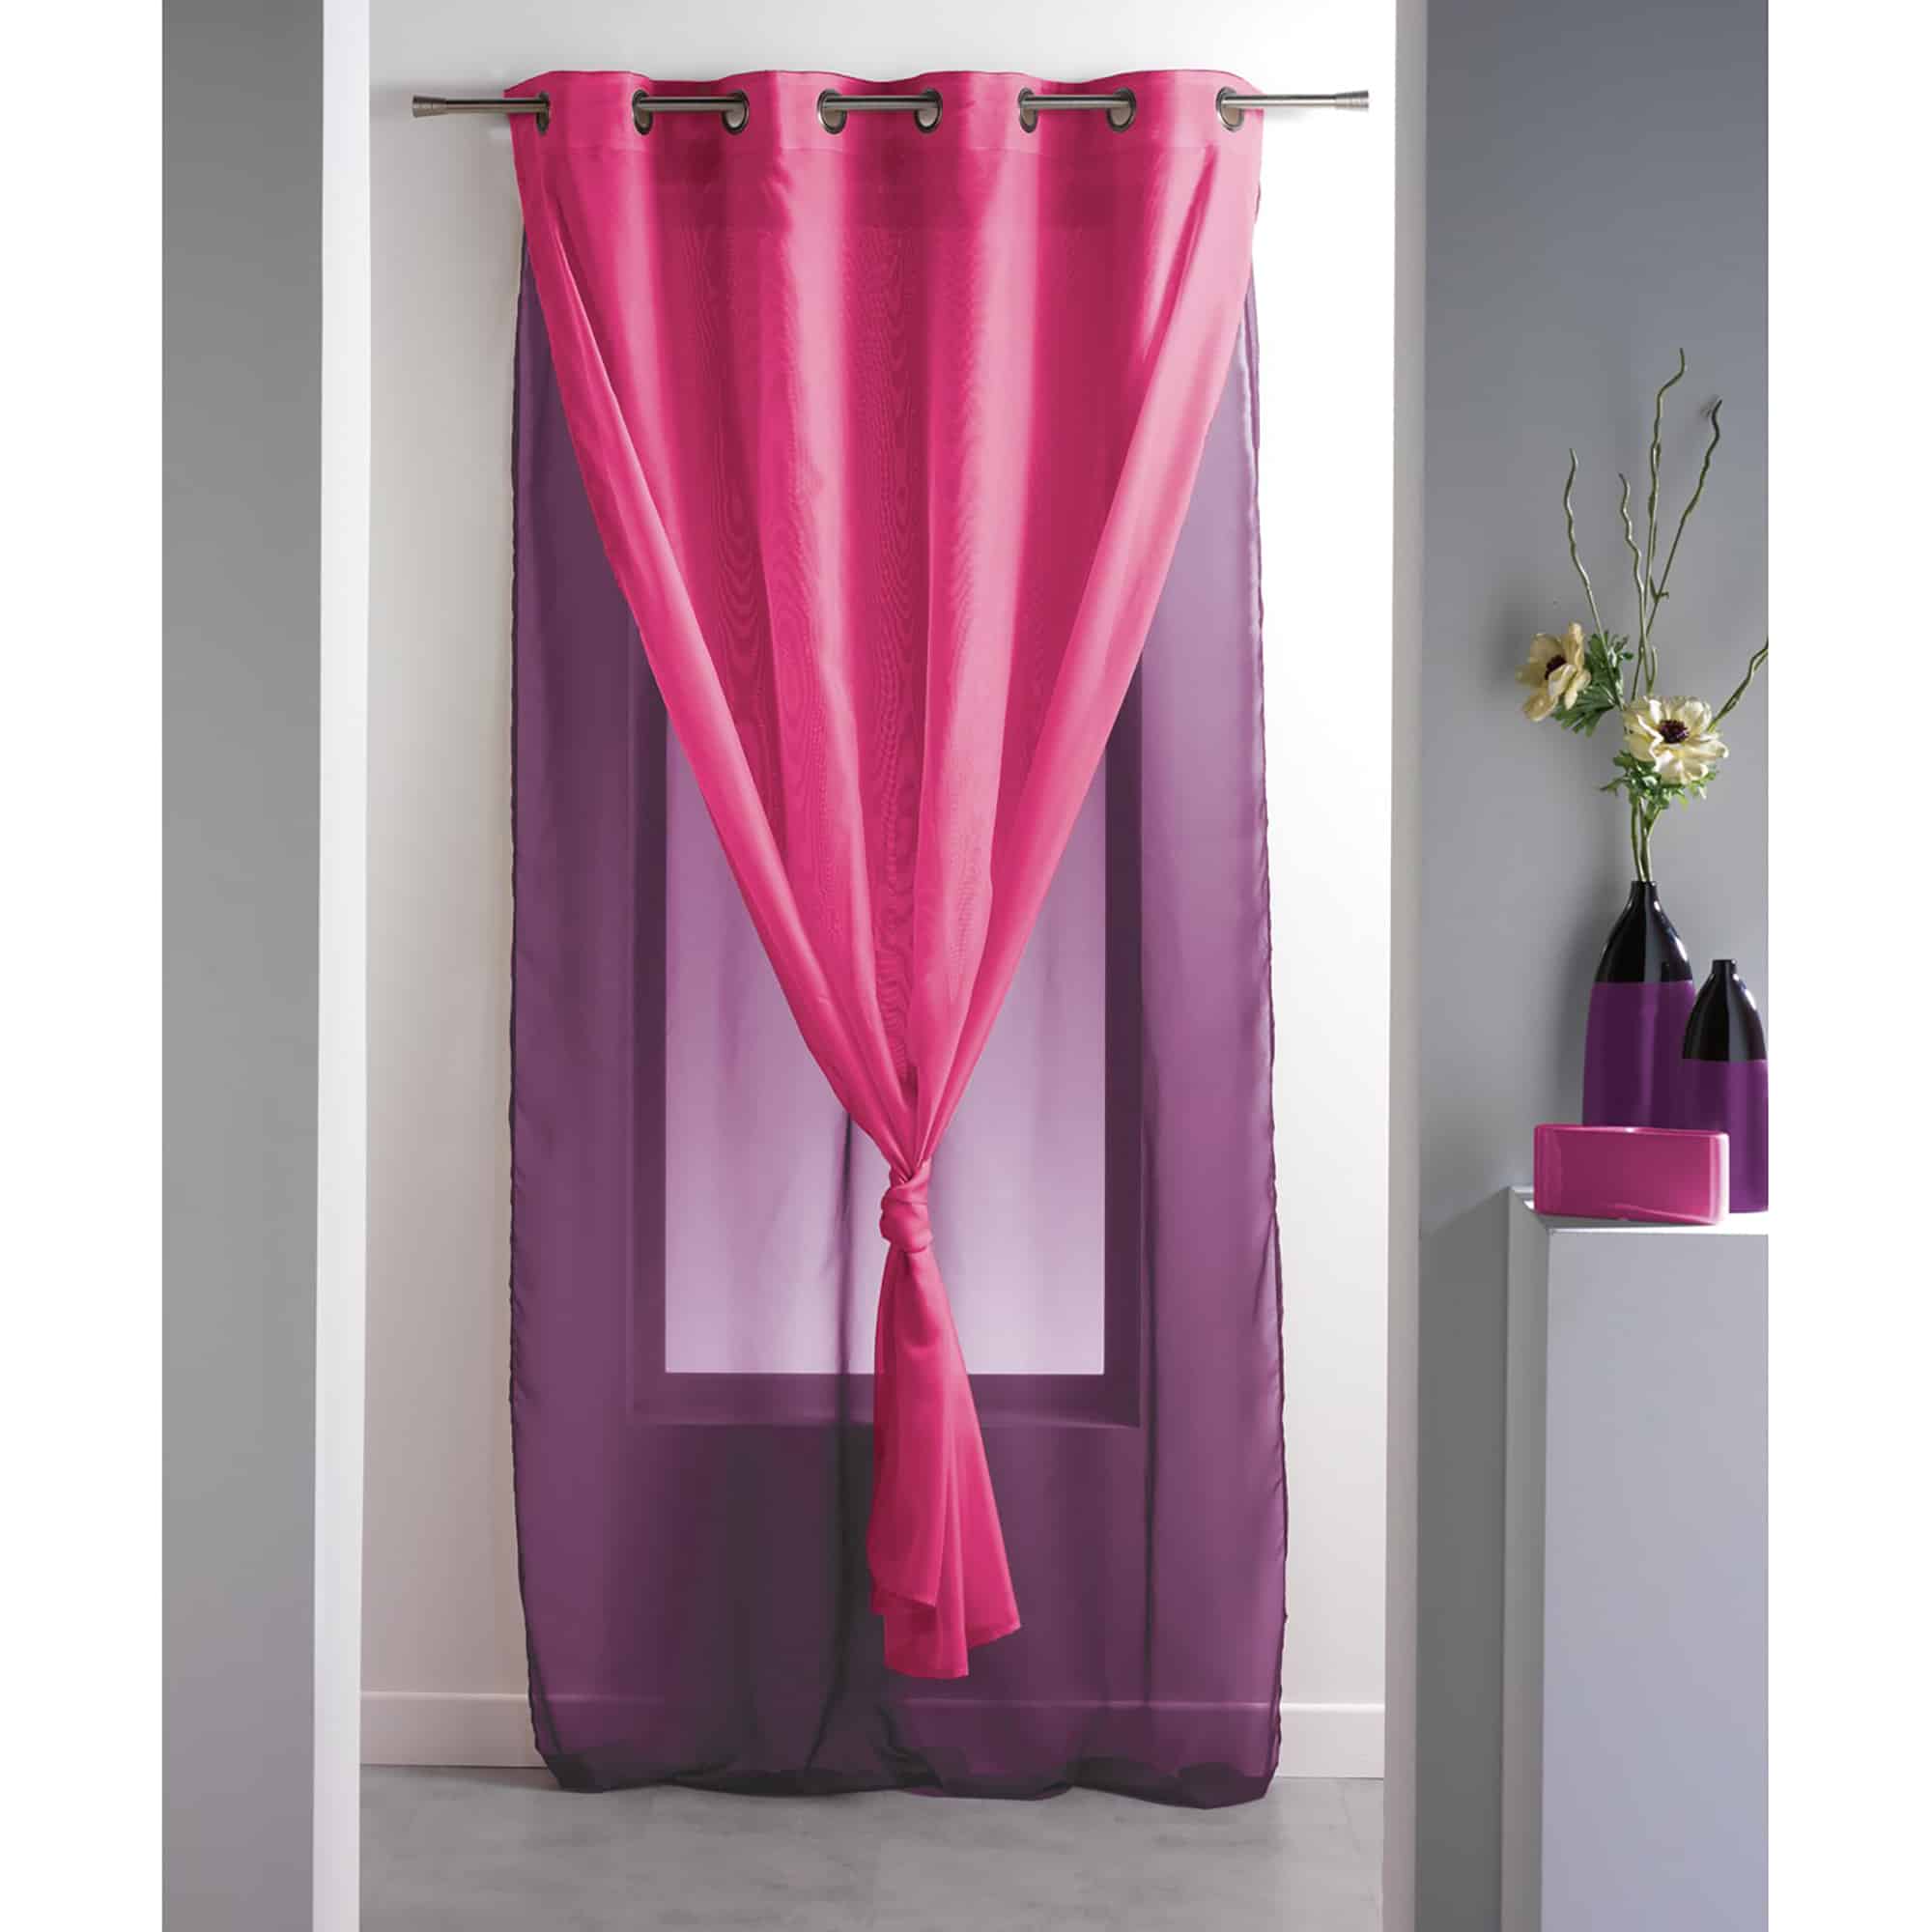 double sheer curtain solid 2 colors pink purple 1 panel for large window